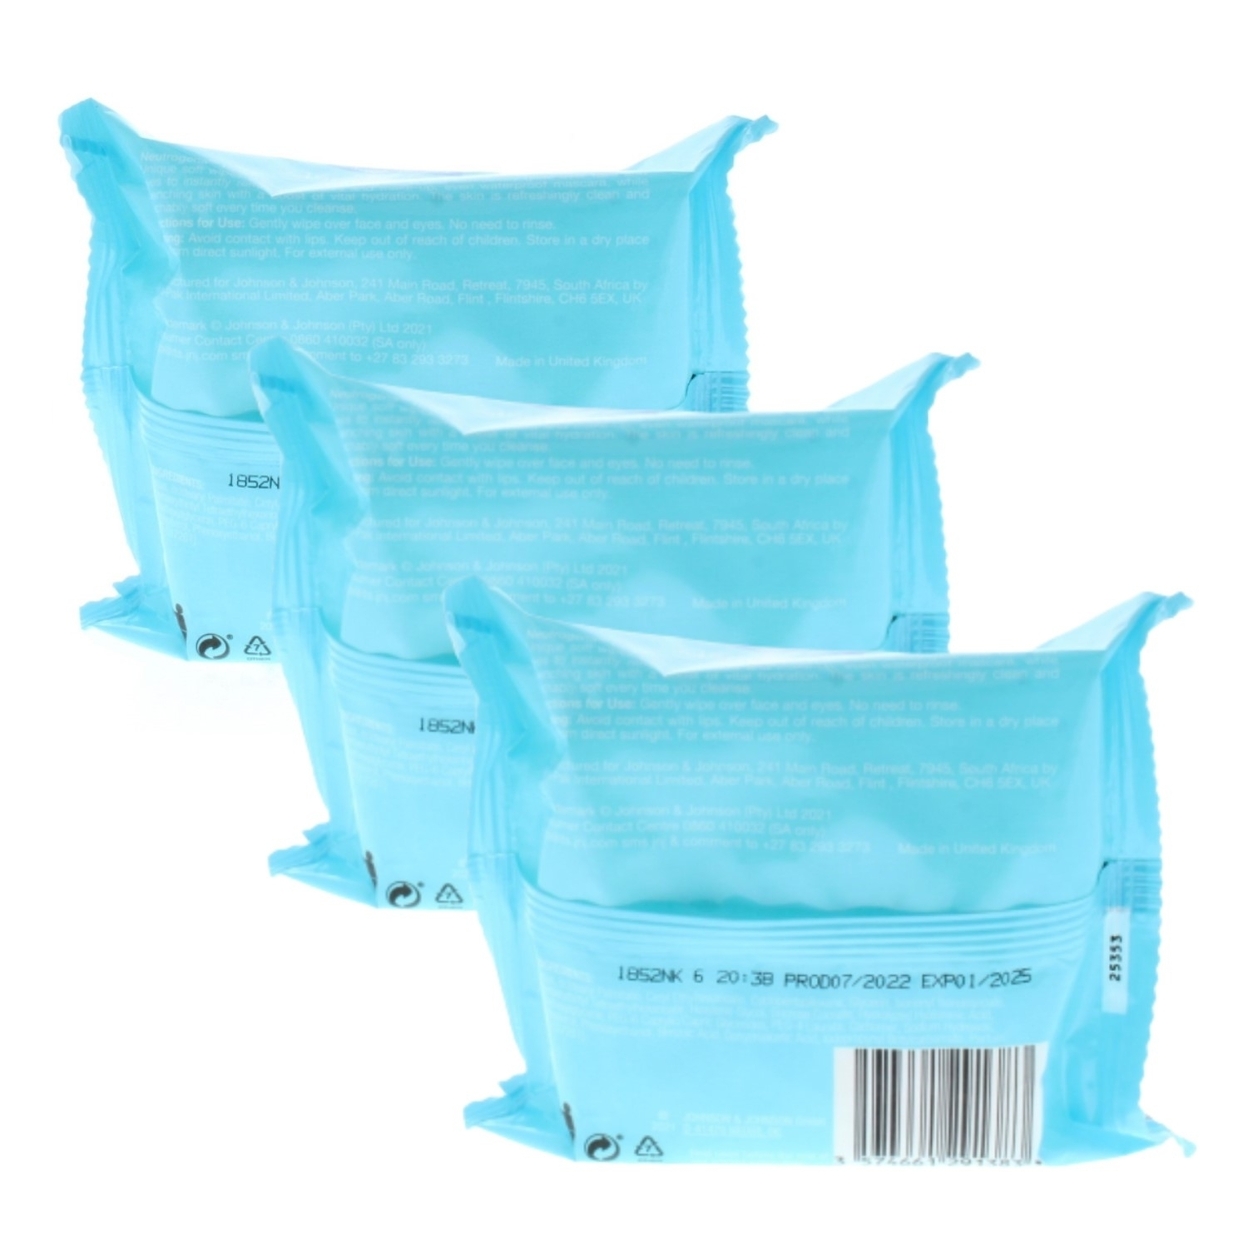 Neutrogena Hydro Boost Cleanser Facial Wipes (3 Packs Of 25 Wipes- Total 75 Wipes)